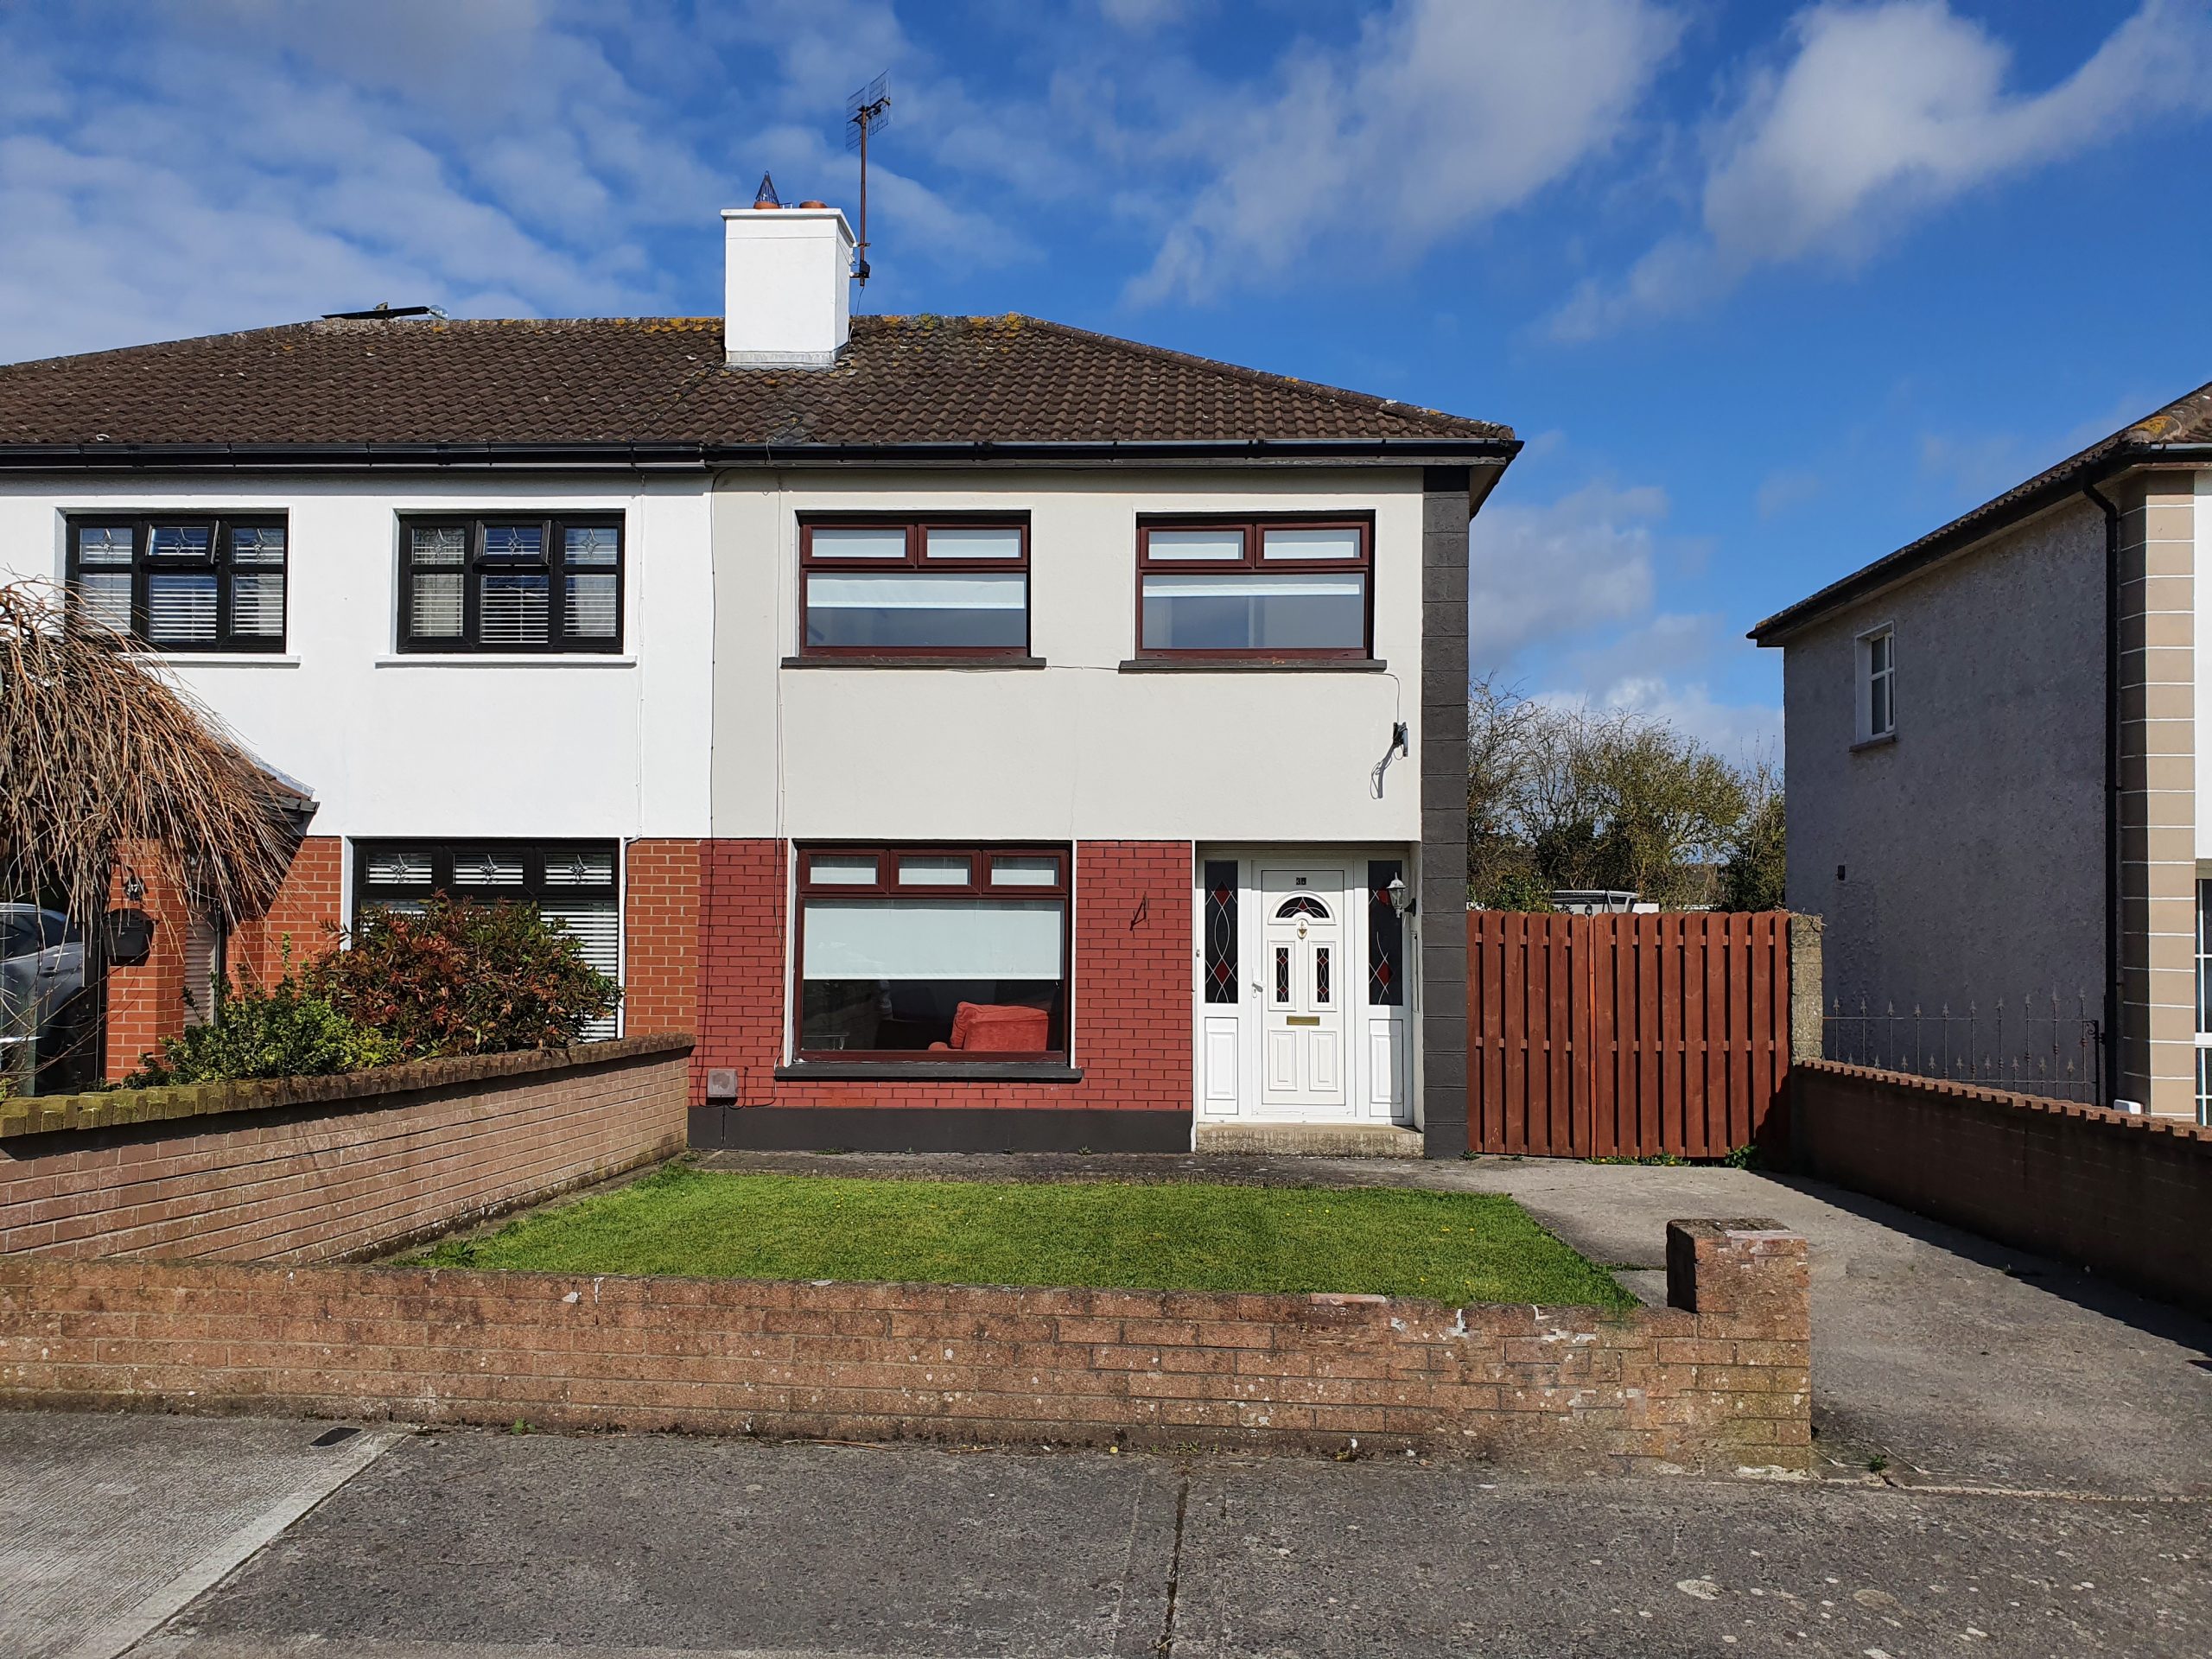 36 Rosevale Drogheda Co Louth